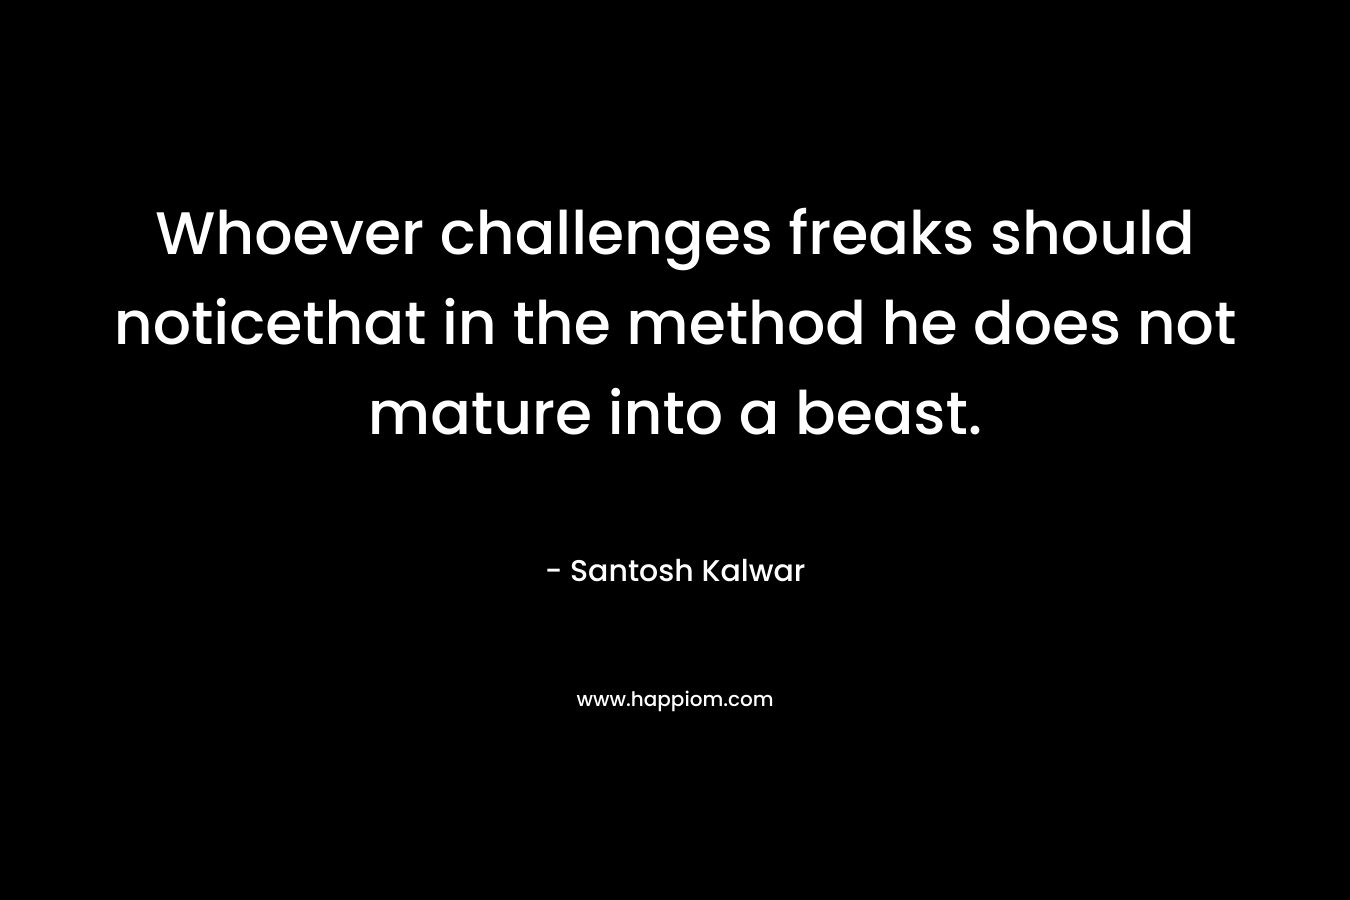 Whoever challenges freaks should noticethat in the method he does not mature into a beast. – Santosh Kalwar